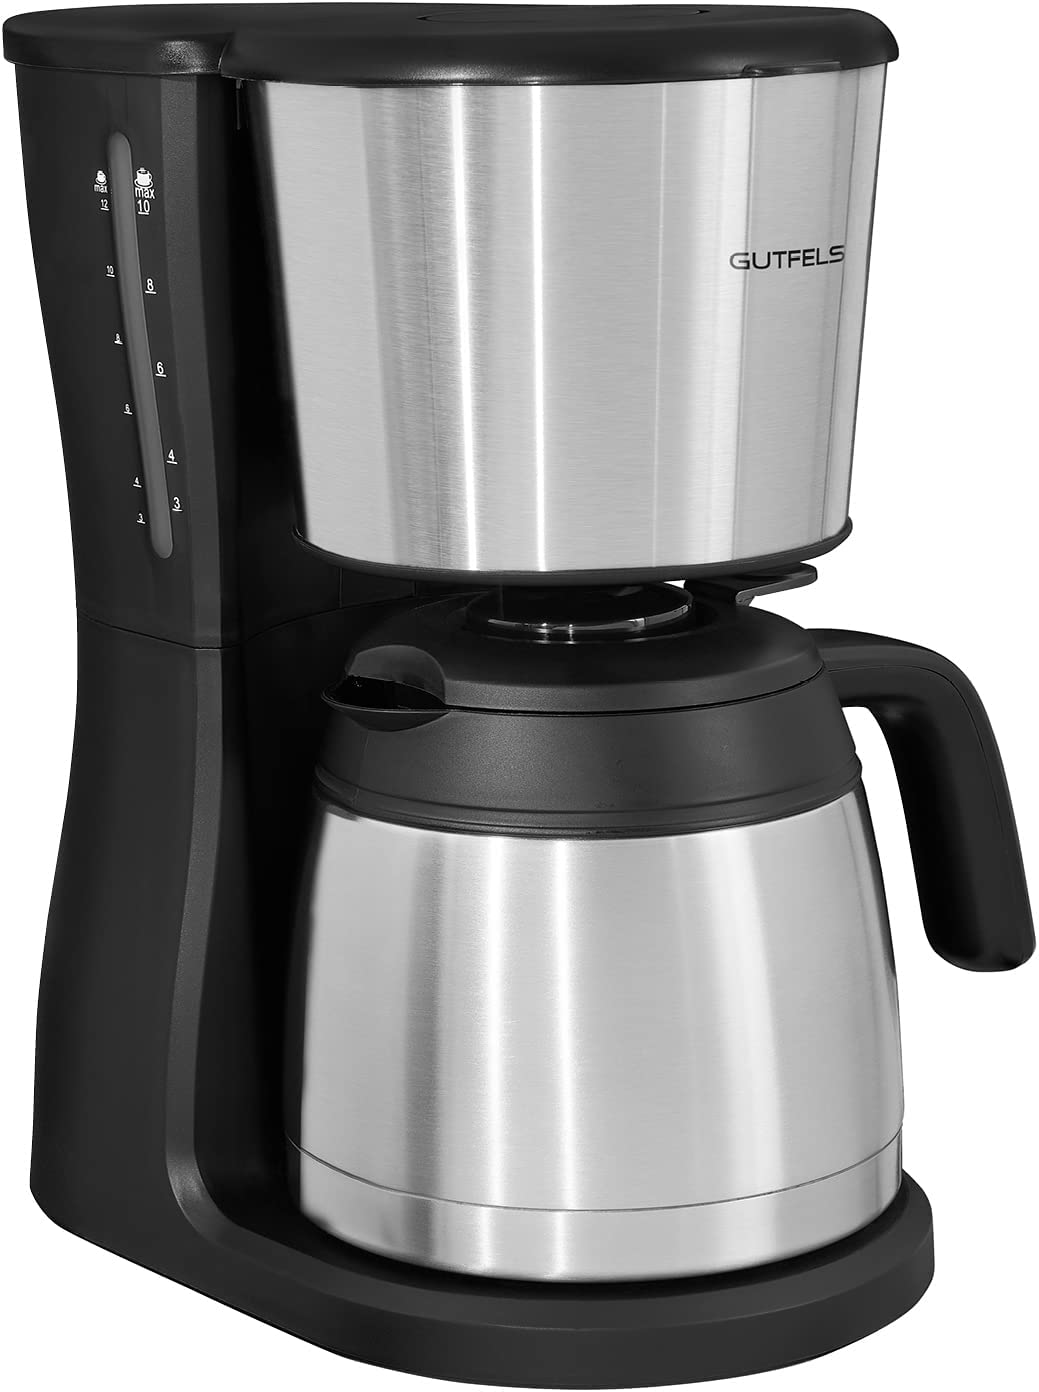 Gutfels Coffee 2030 Filter Coffee Machine | 1.25 Litre Volume for Max. 12 Cups | 980 Watt | Thermos Flask | Water Level | Removable Filter Insert | Drip Stop Function | 1x4 Filter Size